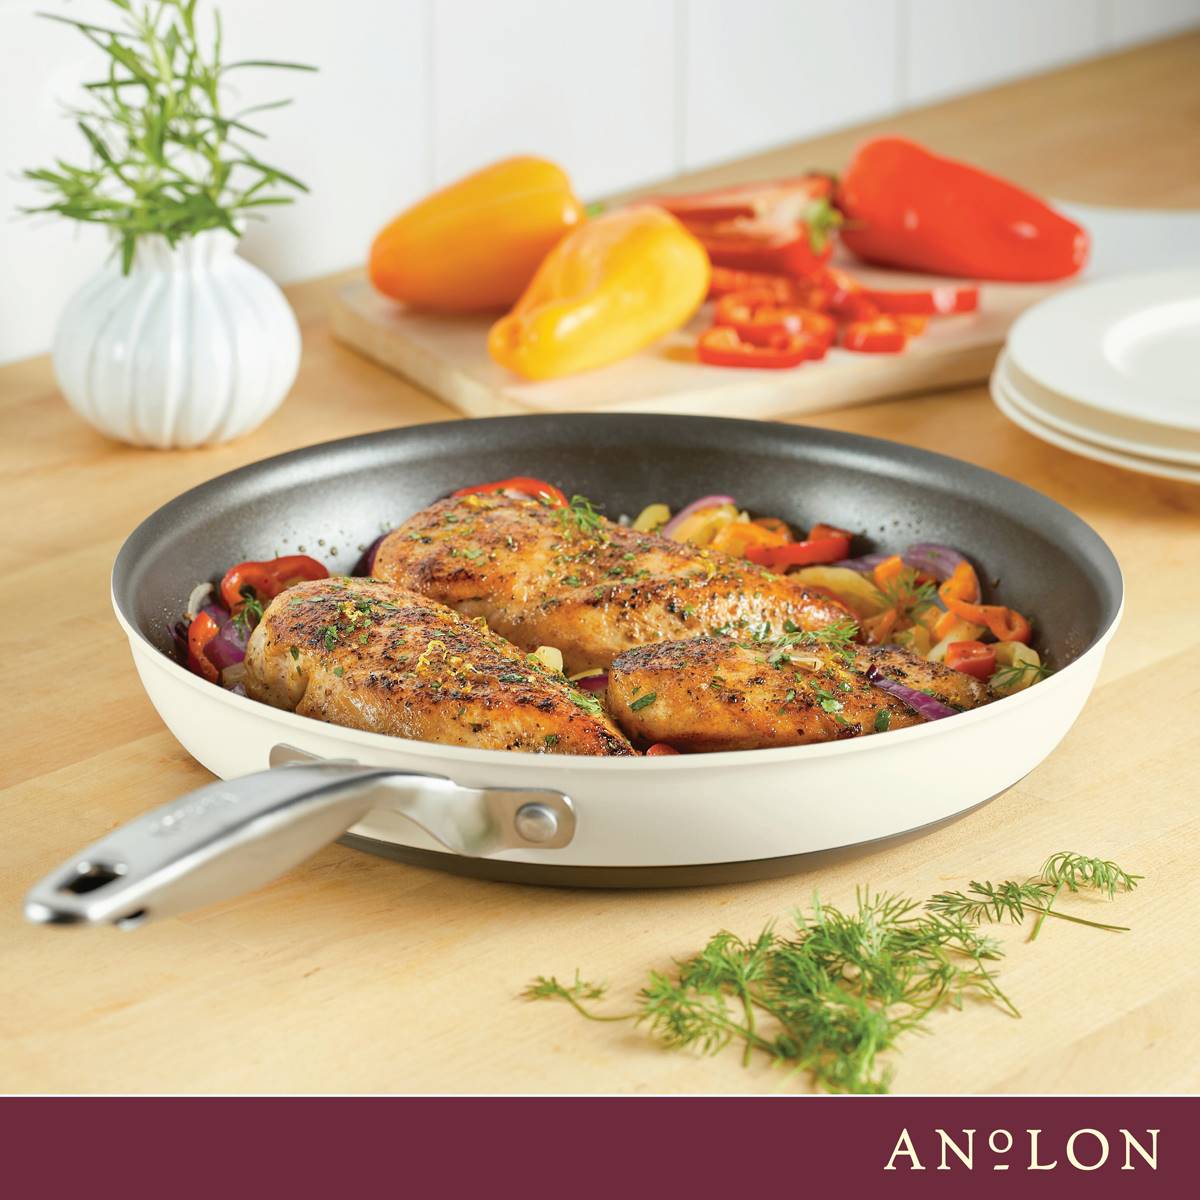 Anolon(R) Achieve Hard Anodized Nonstick 12in. Frying Pan